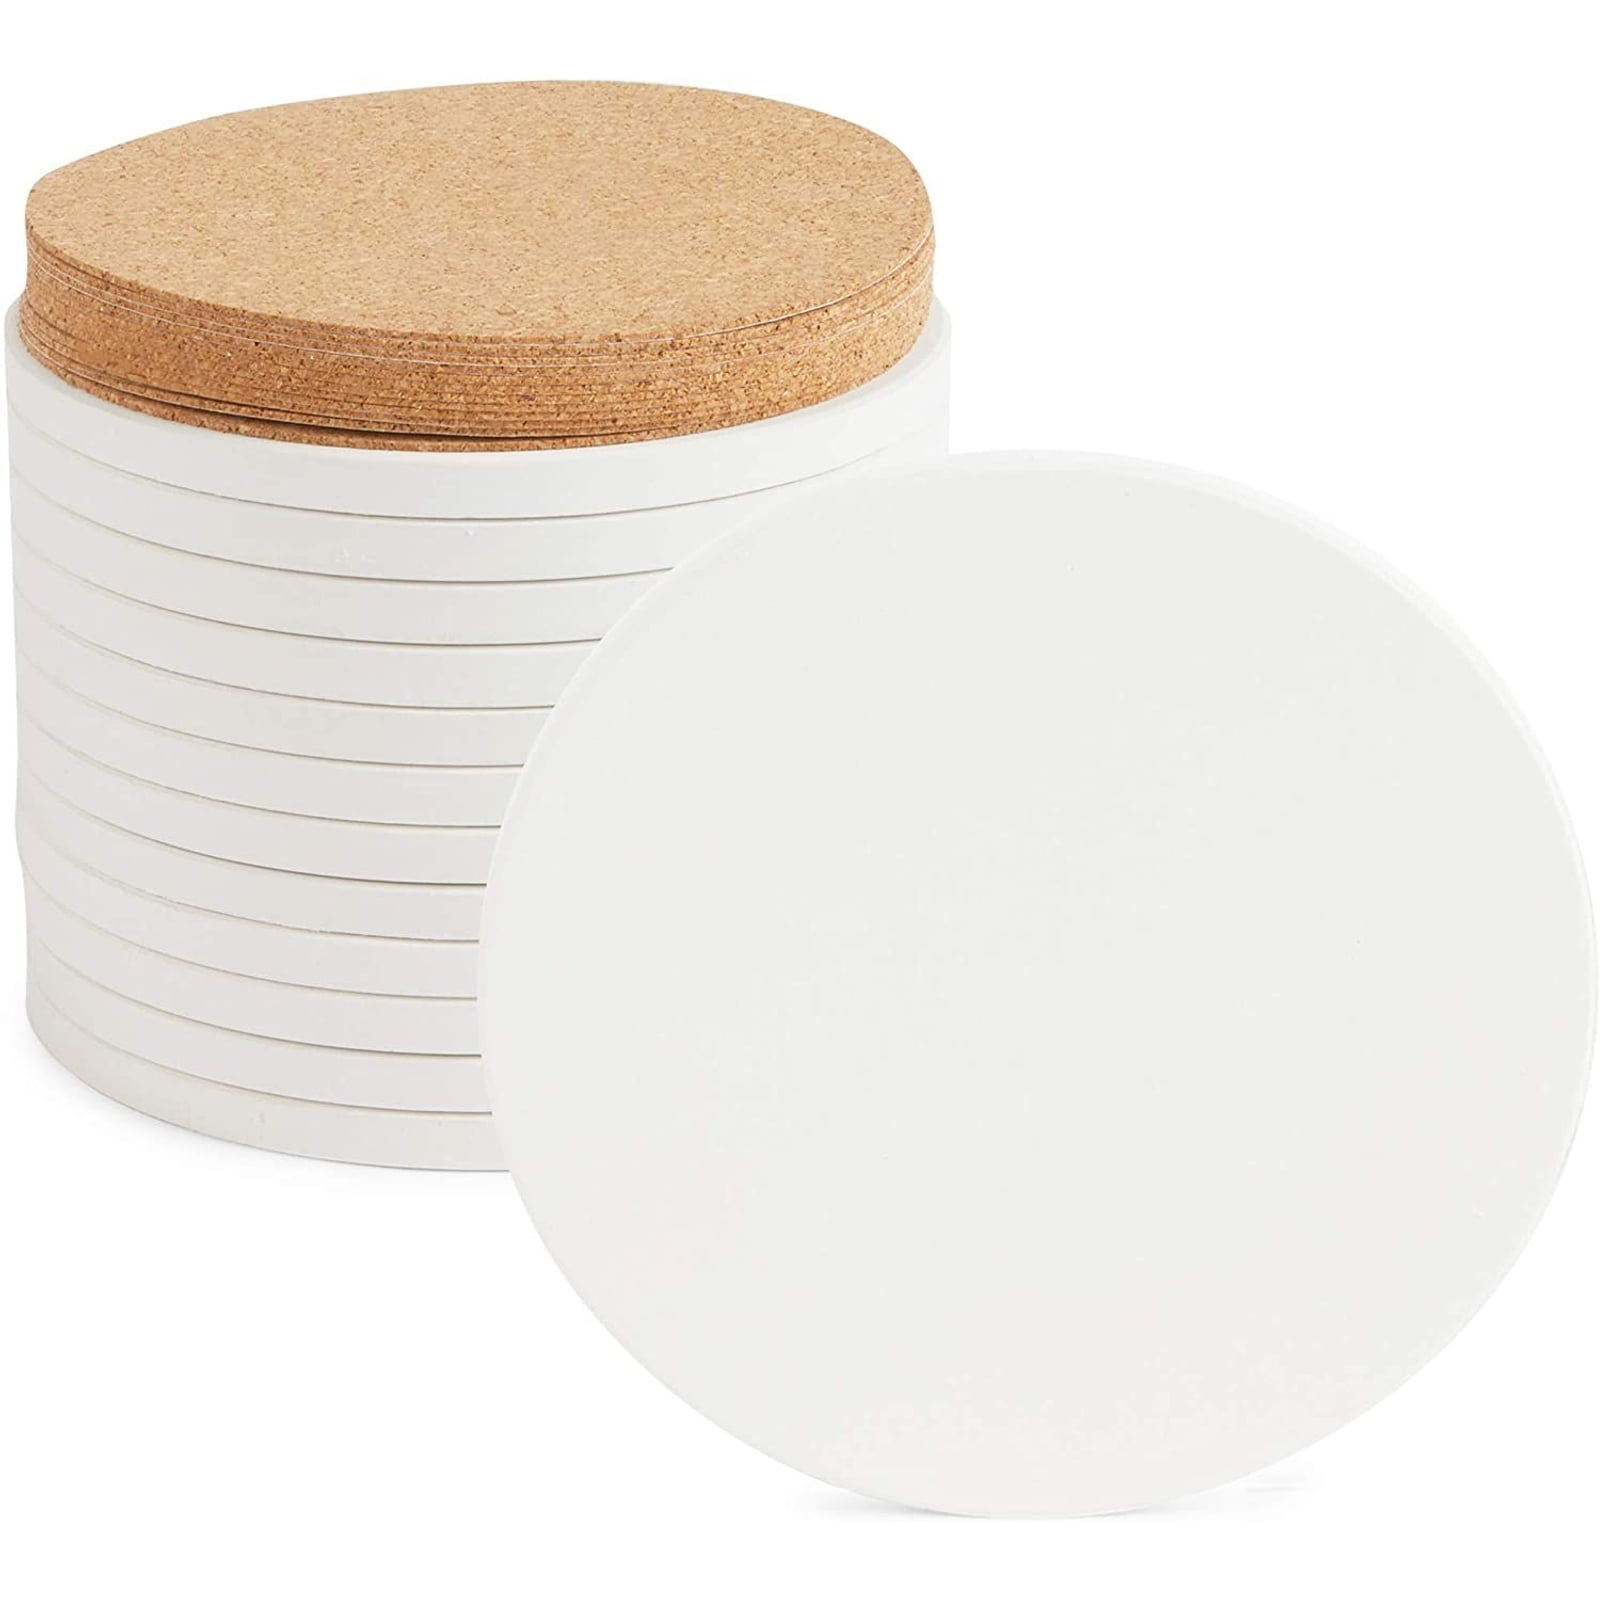 Pack of 4 Square 10cm Cork Coaster Blanks to Decorate for Crafts 